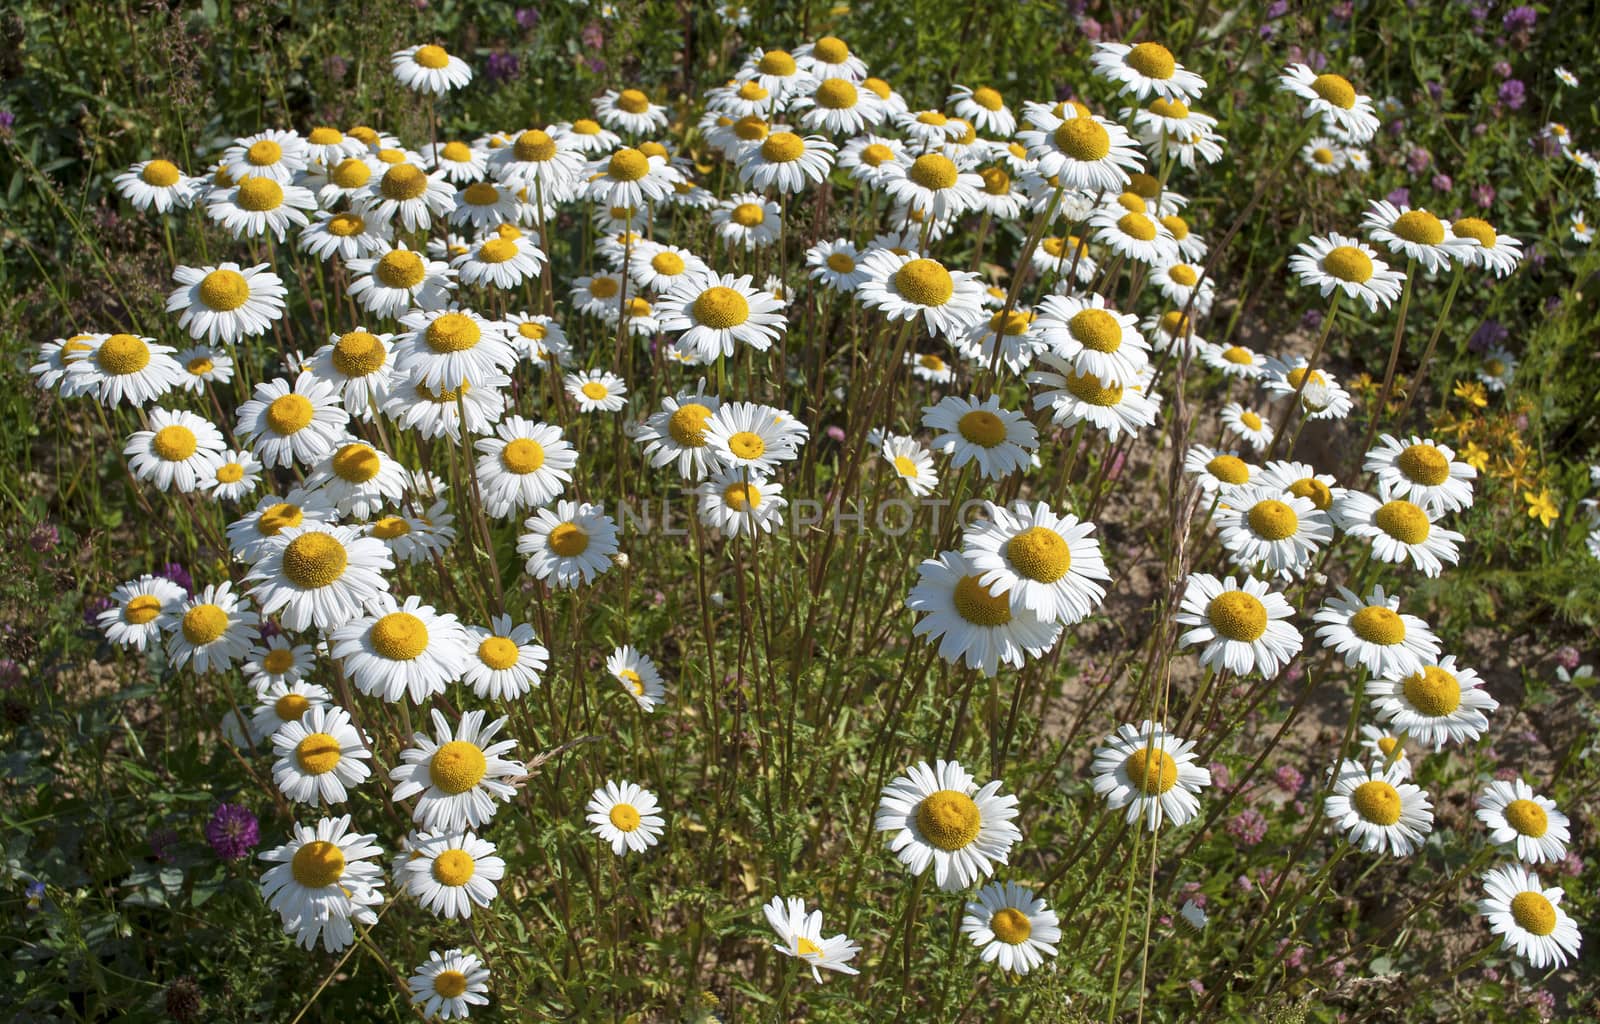 Blooming wild daisies in a forest glade